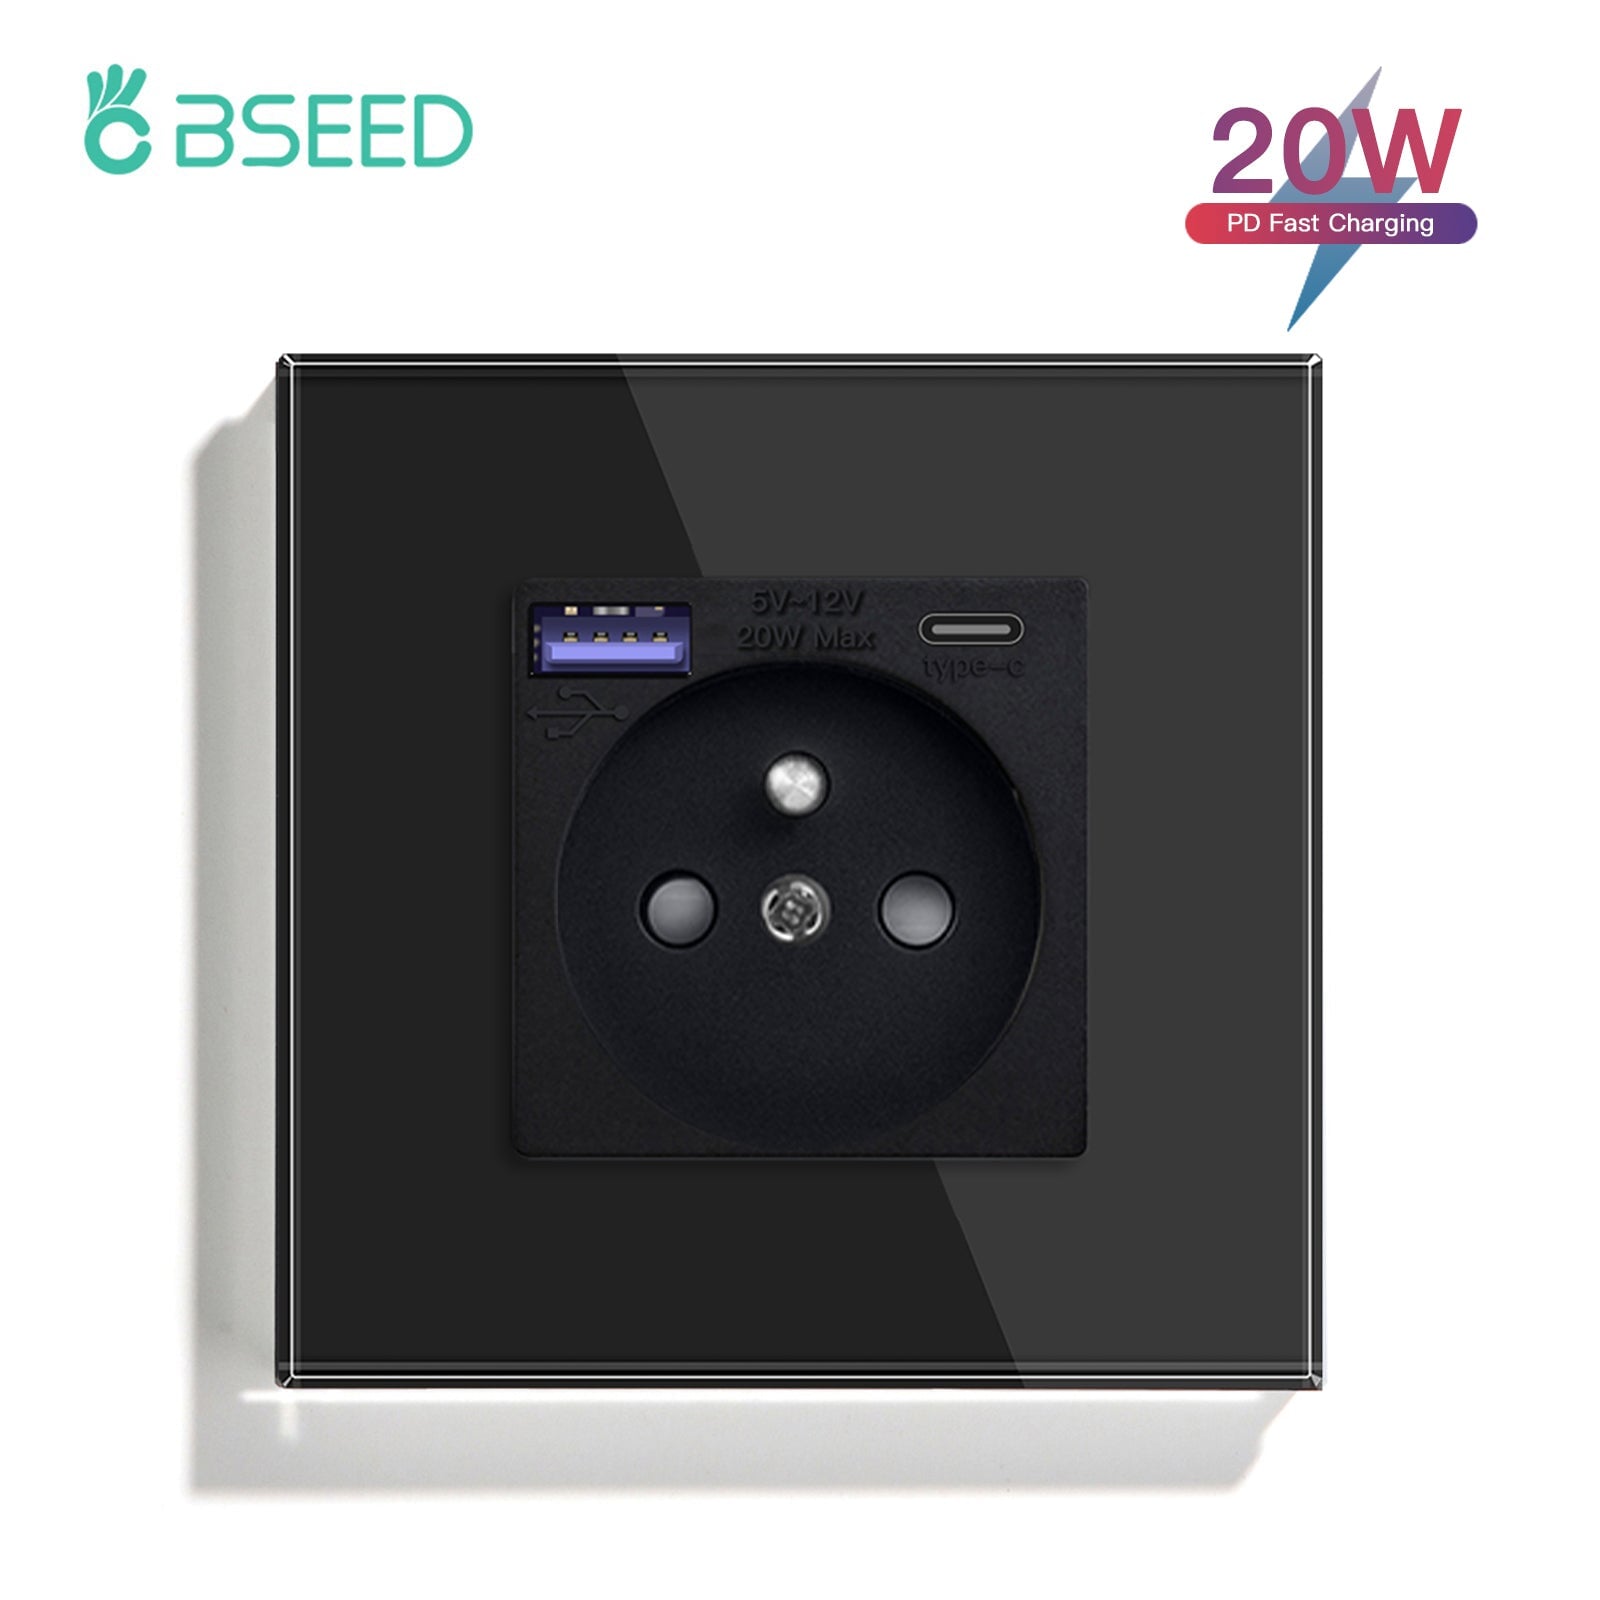 BSEED FR sockets with 20W PD Fast Charge Type-C Interface Outlet Wall Socket Power Outlets & Sockets Bseedswitch Black Signle 